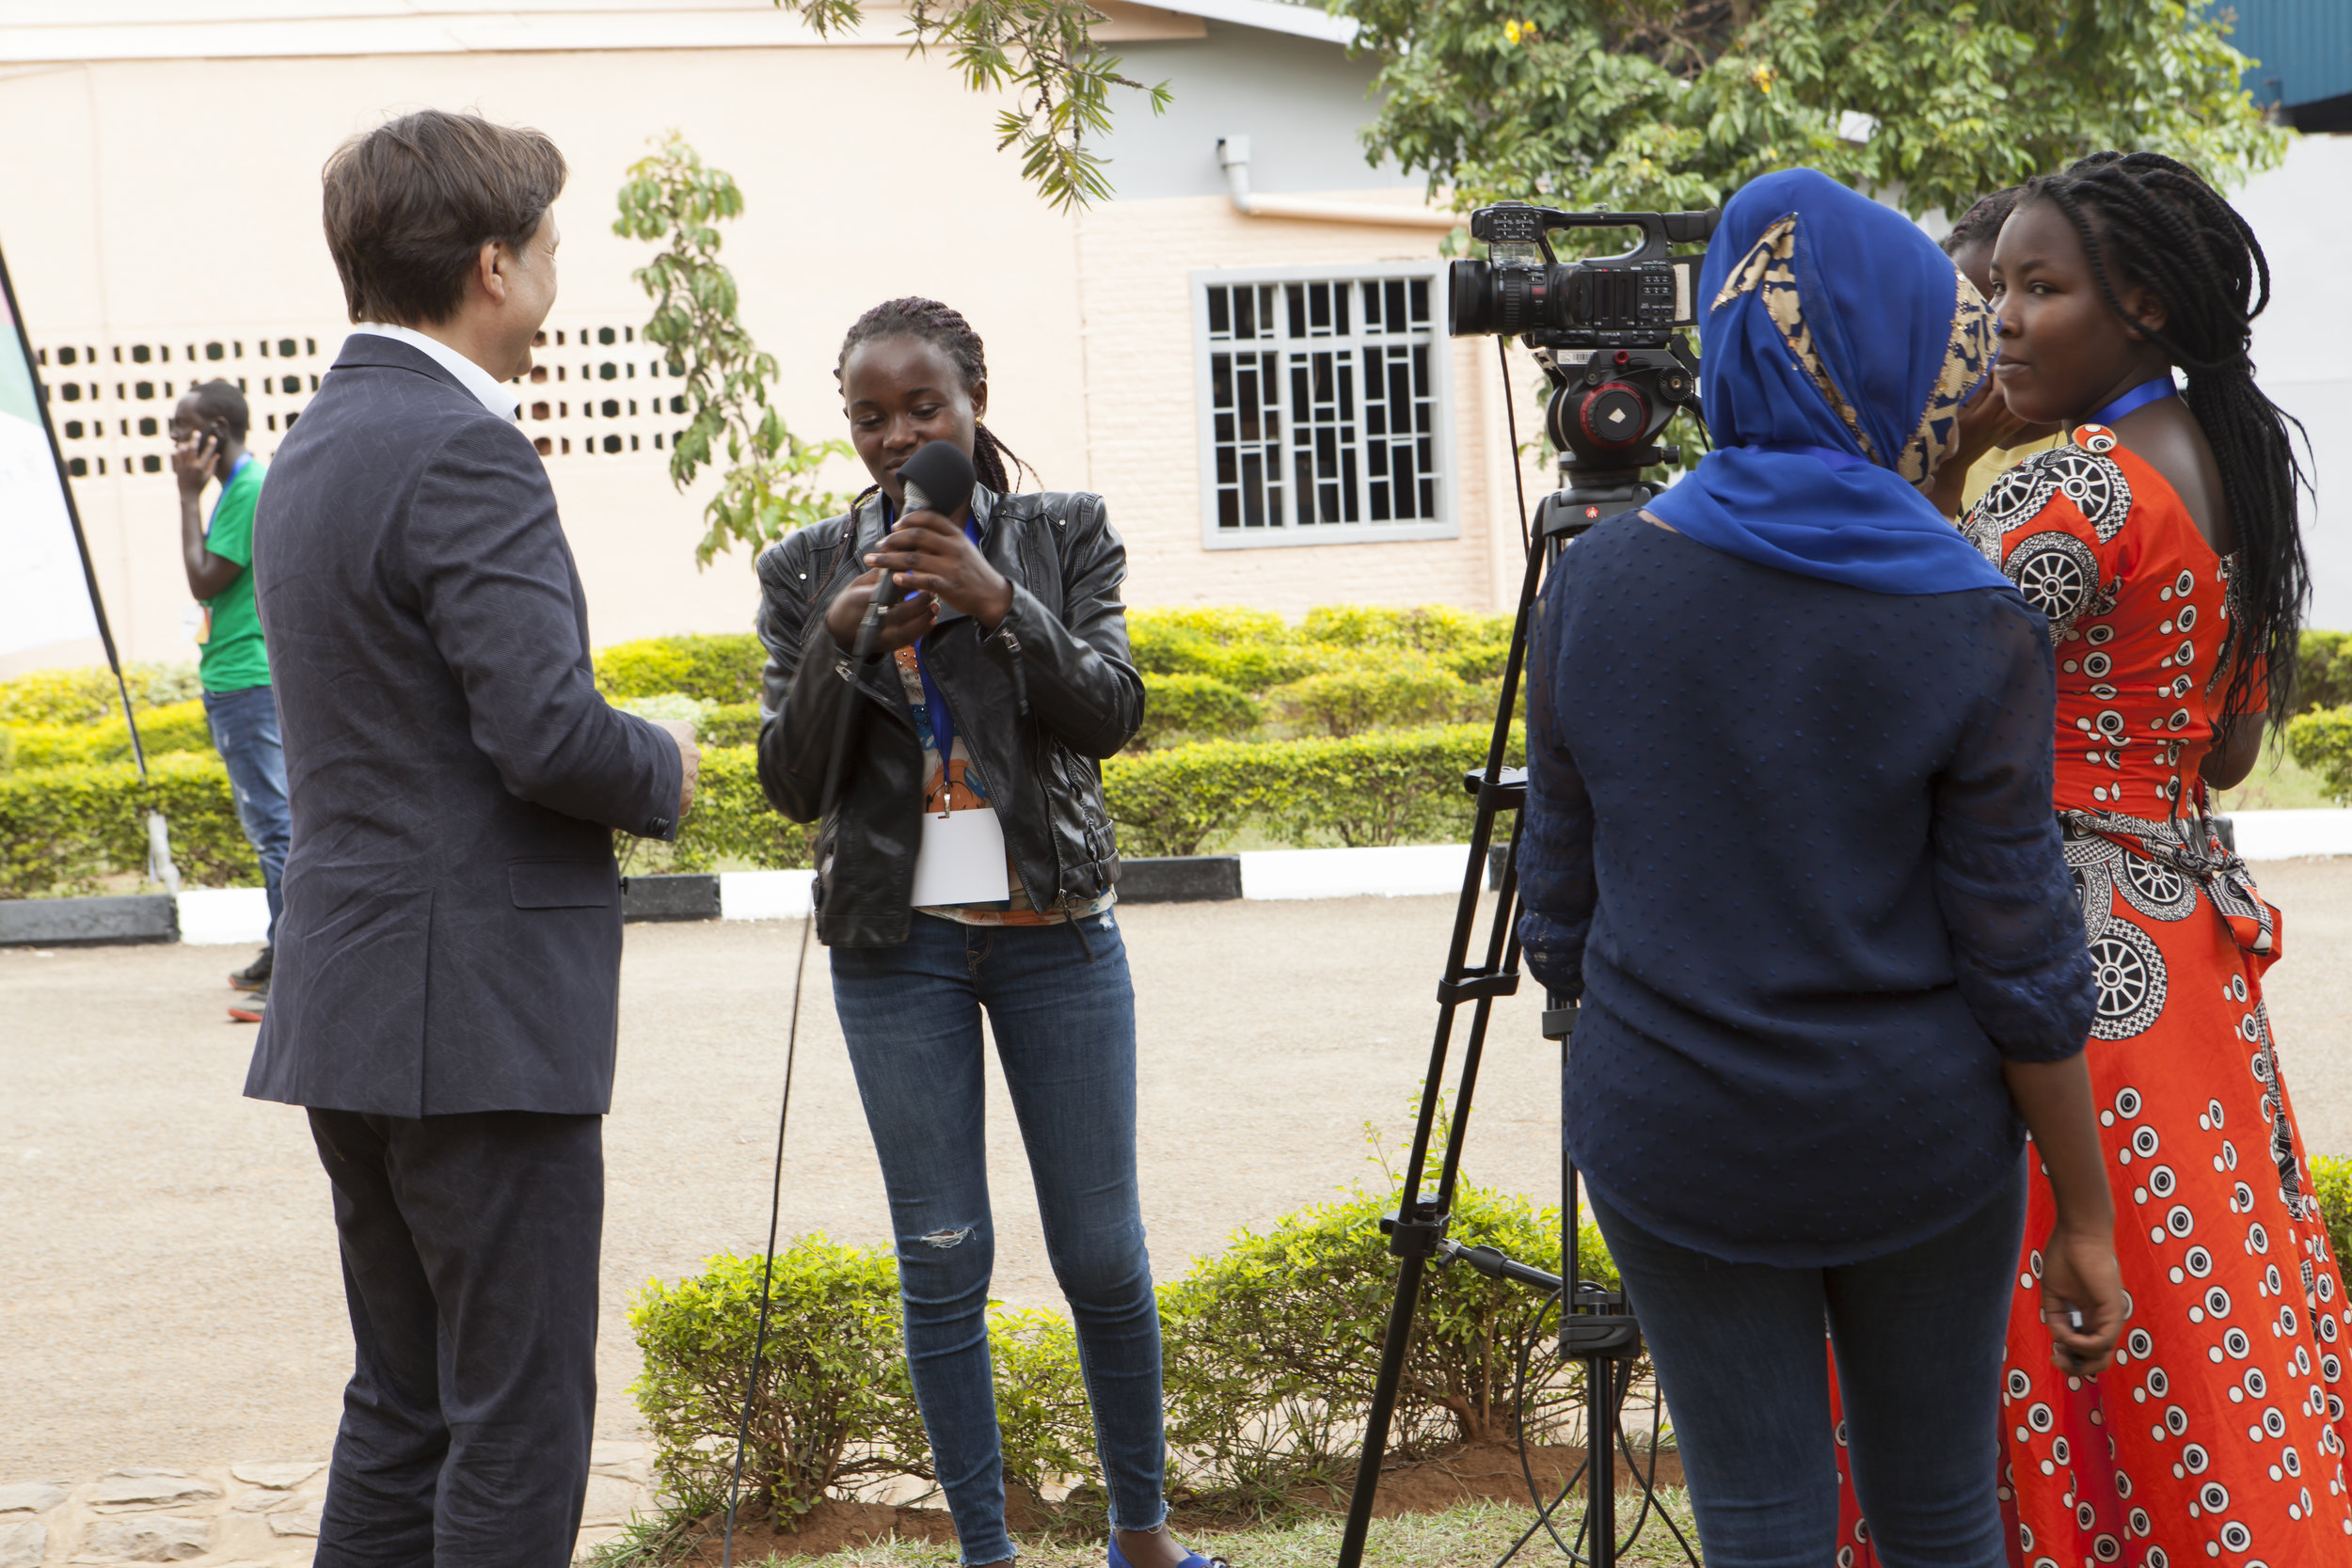 ADMA student Noella Claire Dushakimana sets up for an interview while her classmates look on during the WorldSkills competition at IPRC Kigali